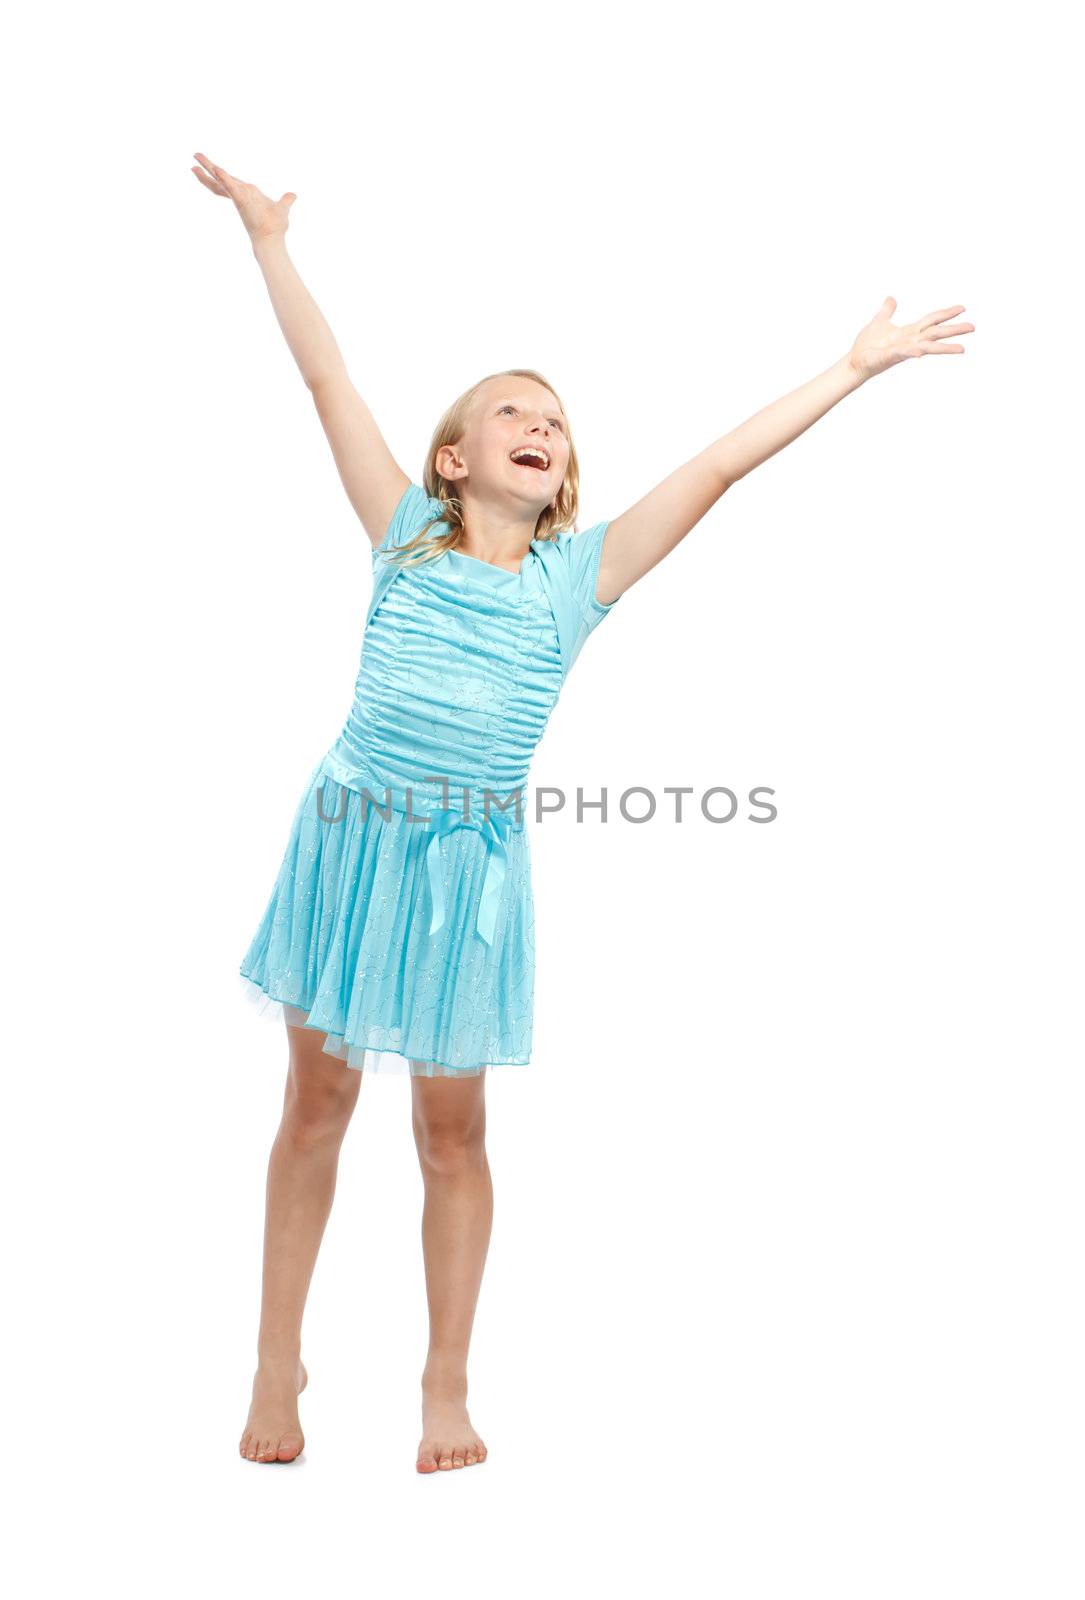 Happy Young Girl in Blue Dress with Arms in the Air - Isolated on White 